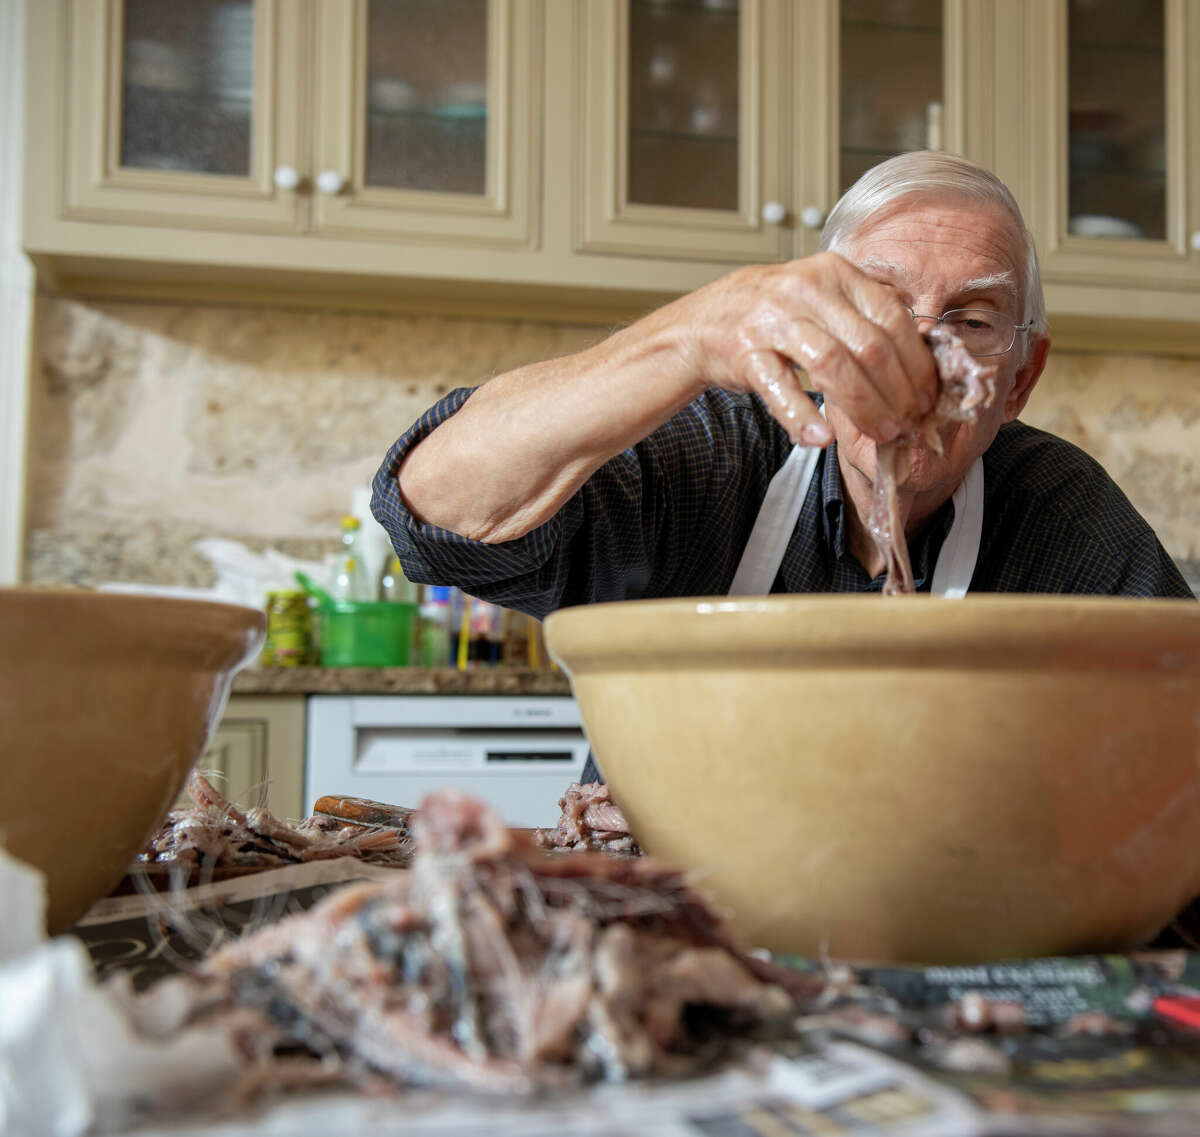 Fred Pfeiffer prepares herring for a herring salad, a German dish typically prepared and served during the Christmas season.